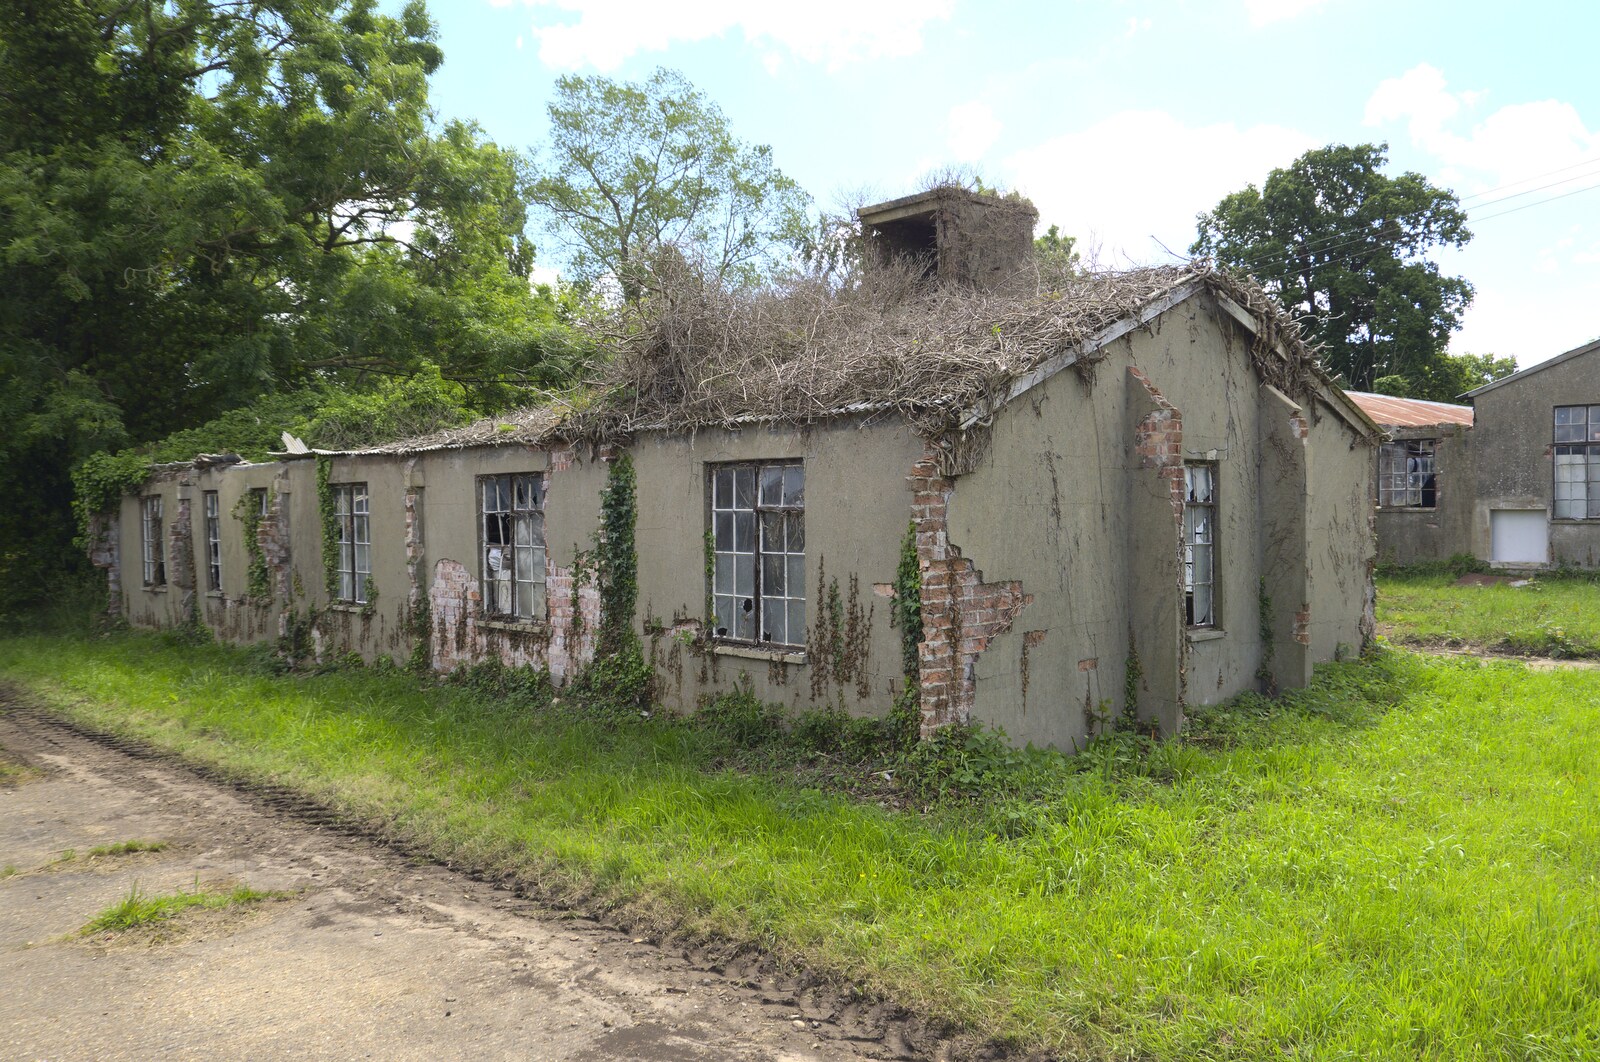 Some of the buildings are very derelict from A 1940s Timewarp, Site 4, Bungay Airfield, Flixton, Suffolk - 9th June 2022